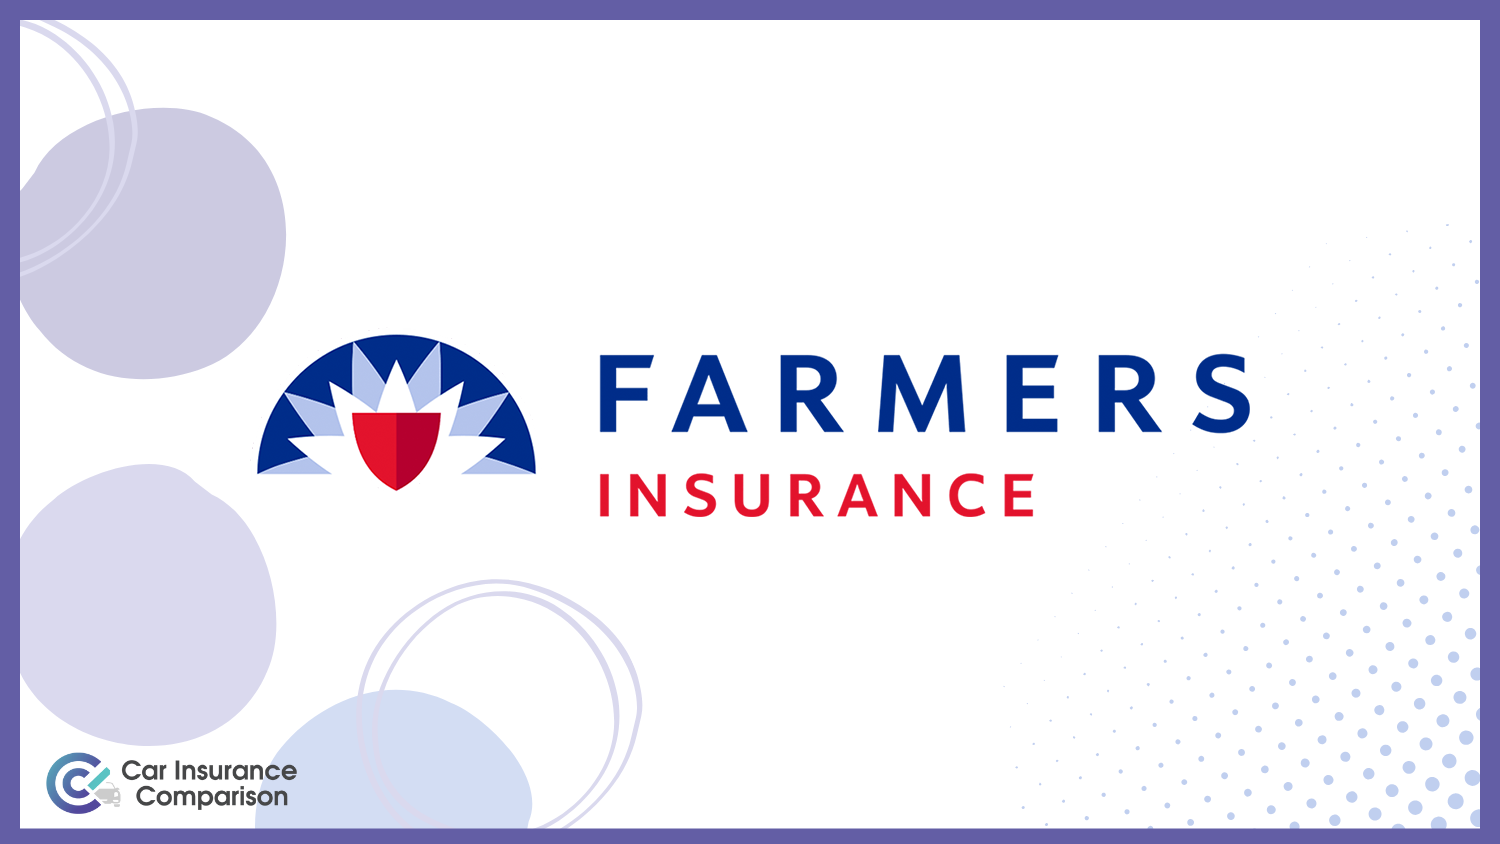 Farmers: Compare Best Car Insurance Companies That Only Look Back Three Years